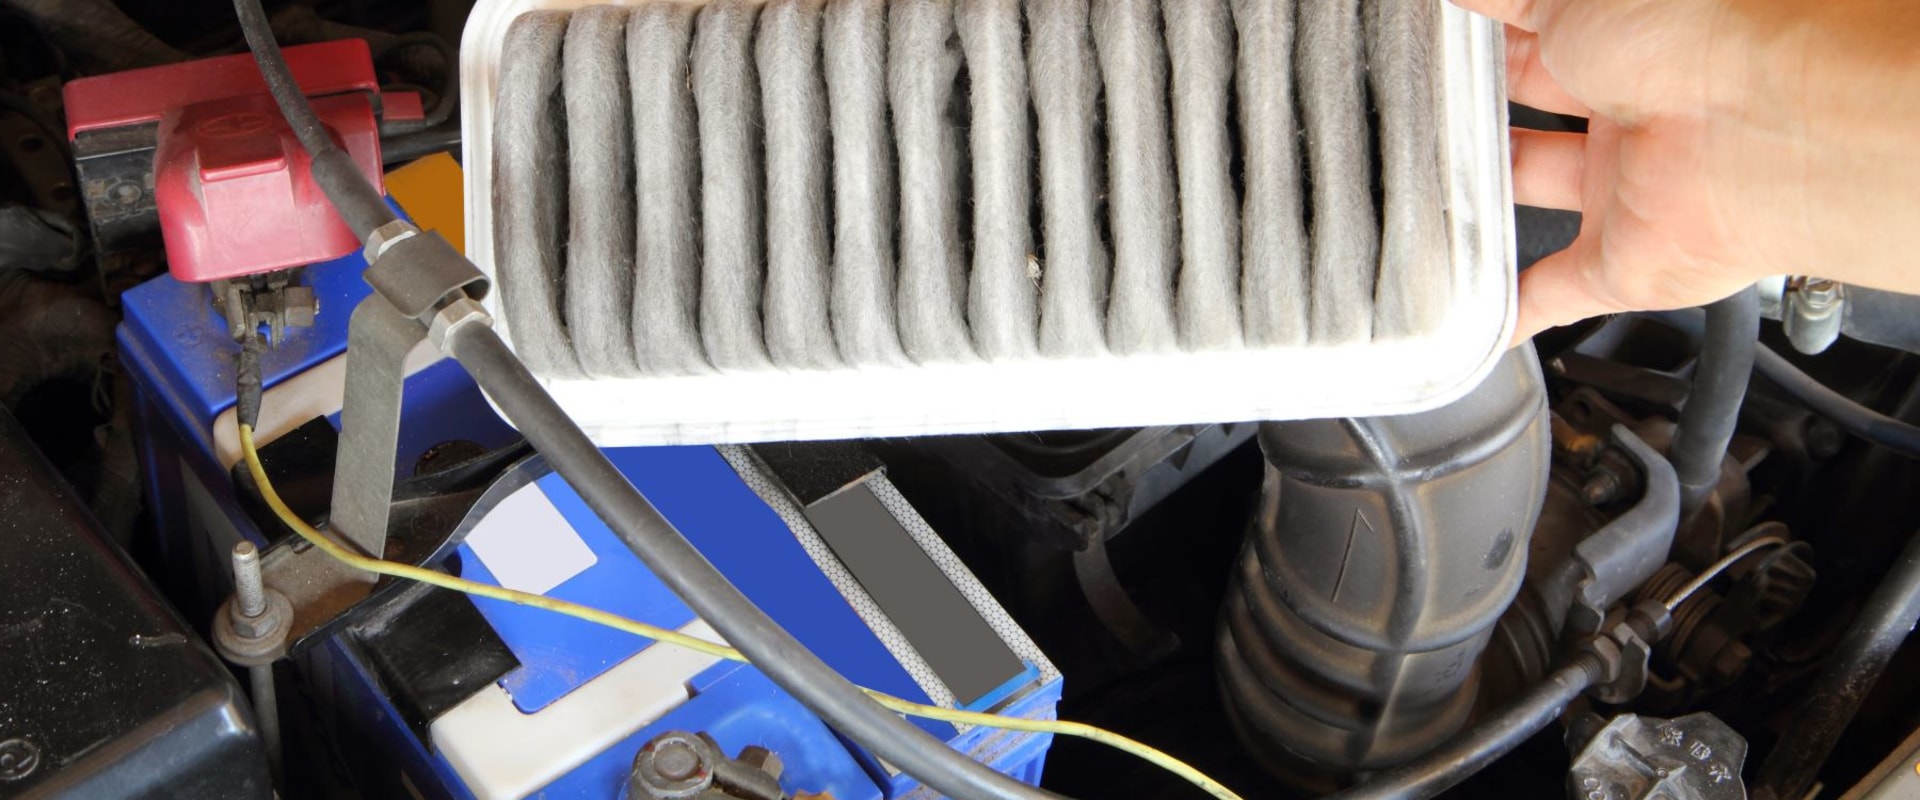 Can a Dirty Air Filter Keep AC From Cooling?